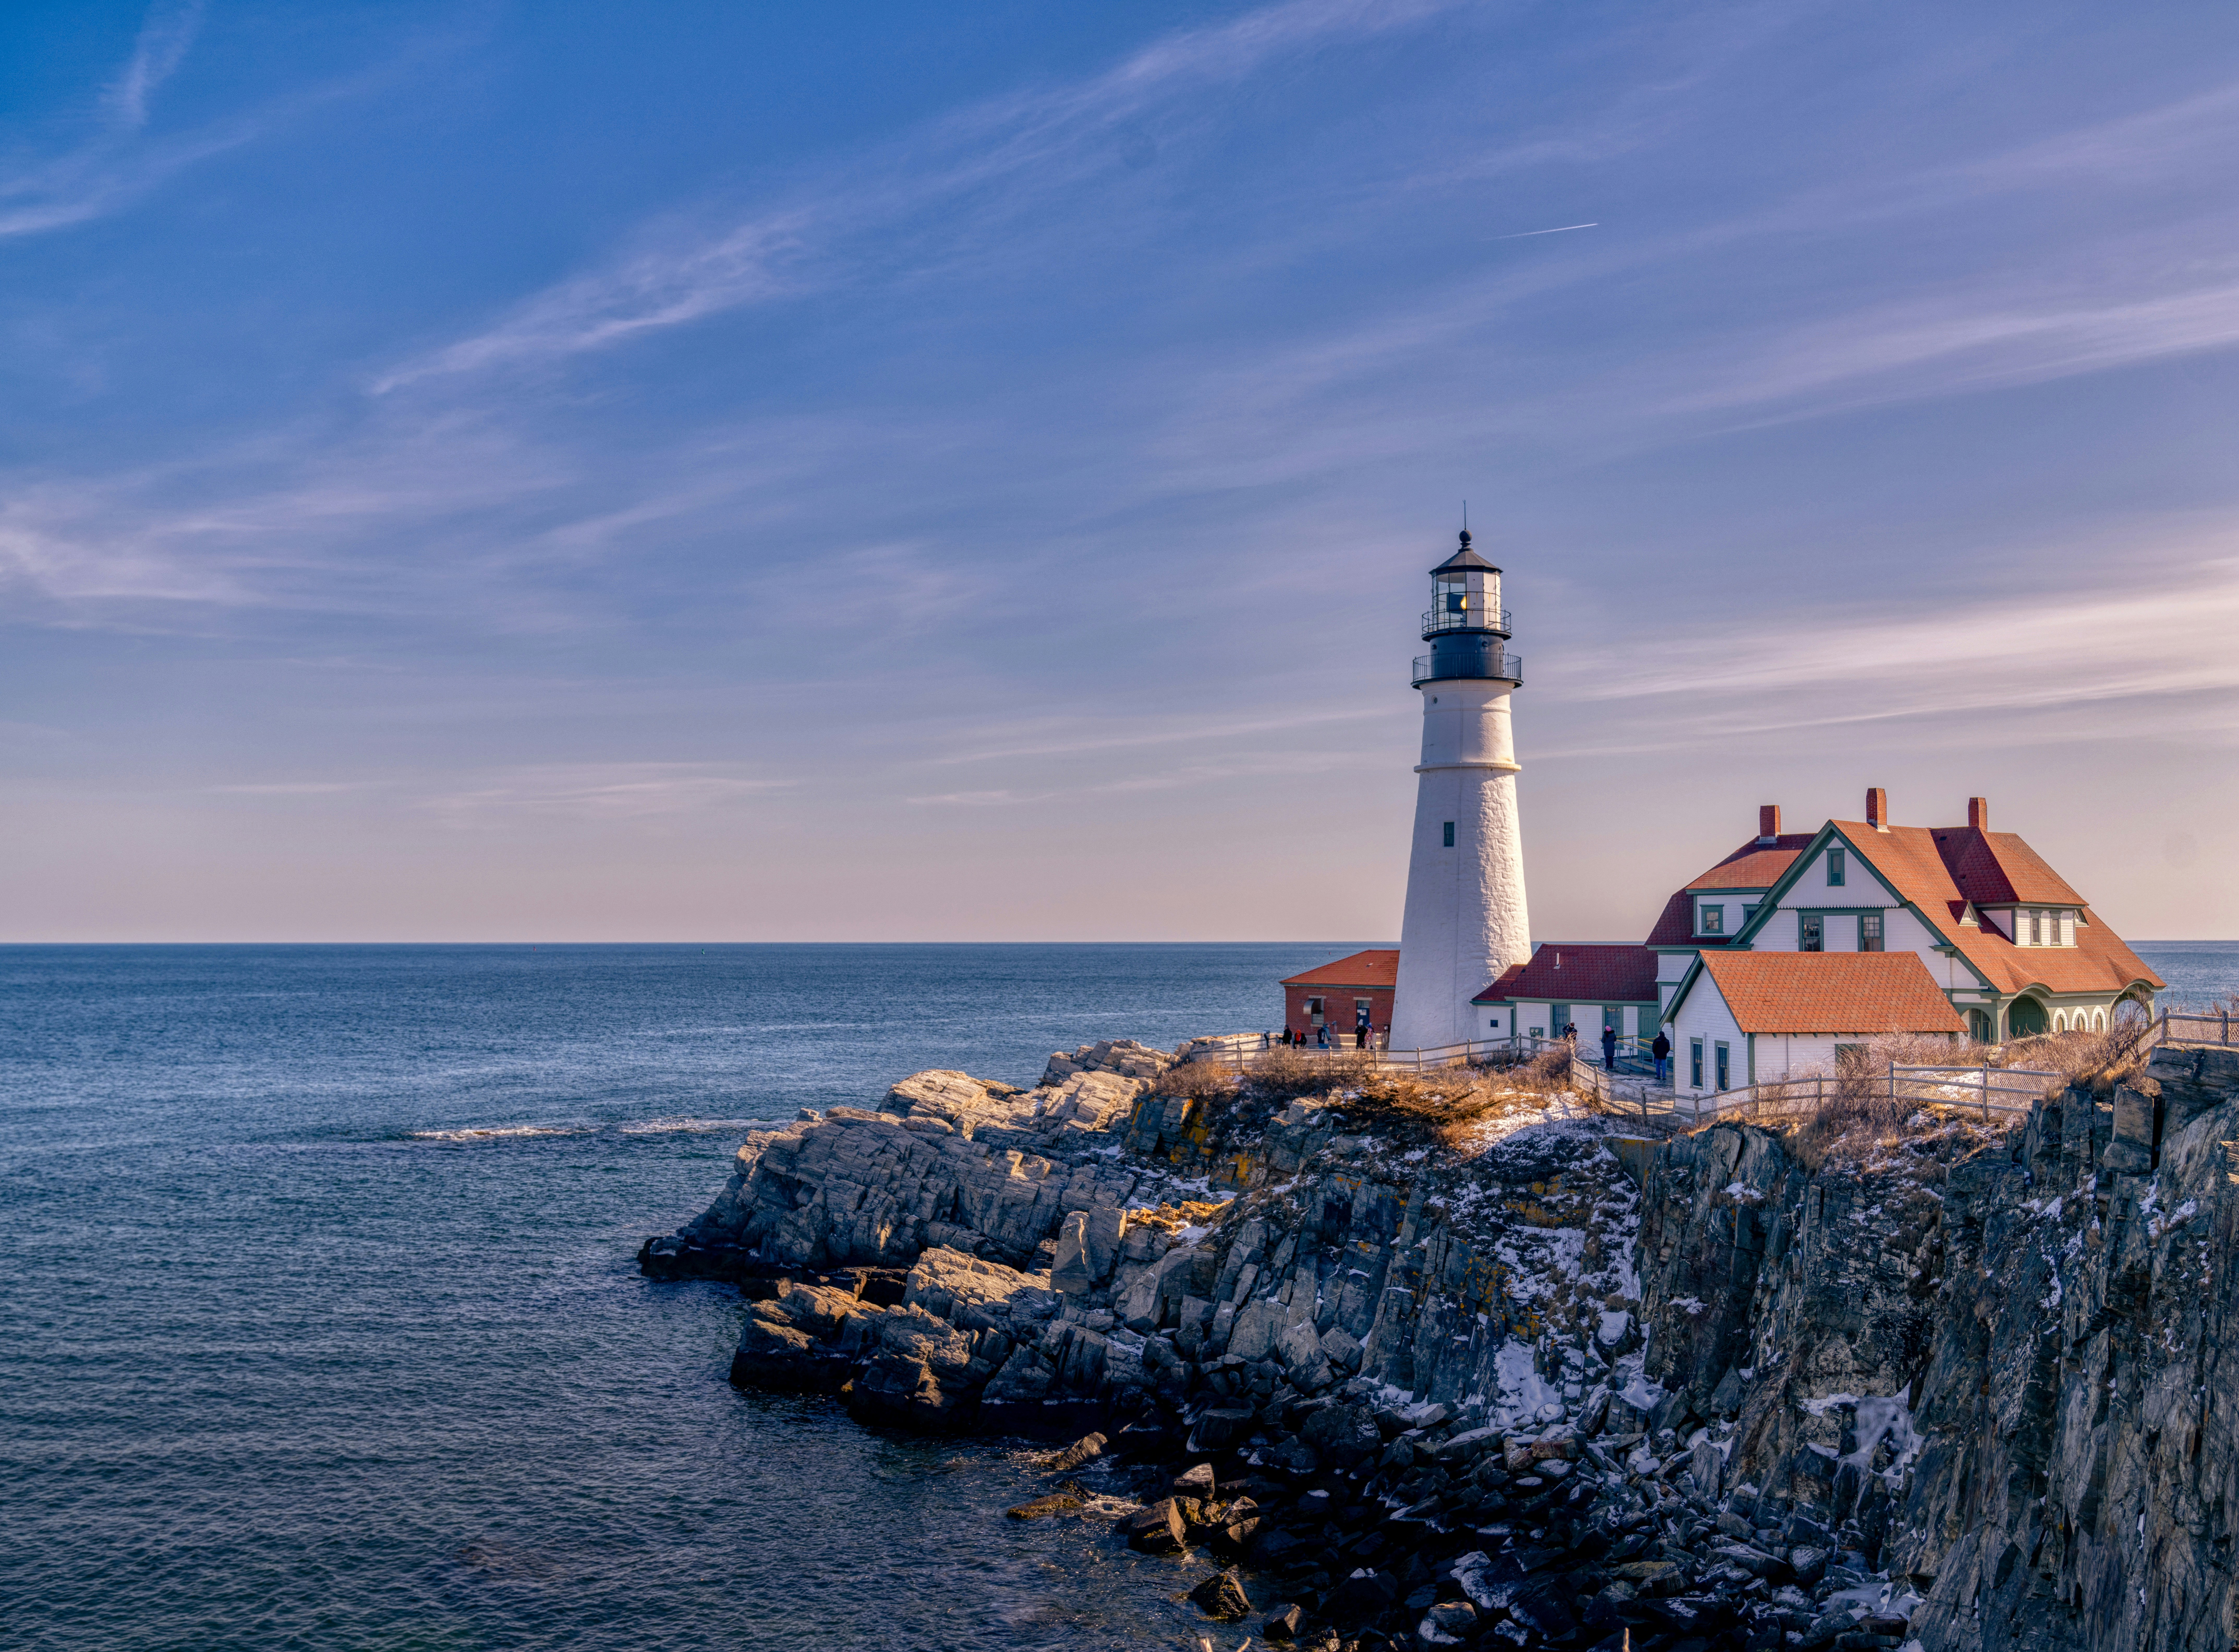 Maine is a coastal state that many love to visit. Learn more about the New England state's offerings.
pictured: a cliff in Maine with a lighthouse and lodging sitting near the rocky edges